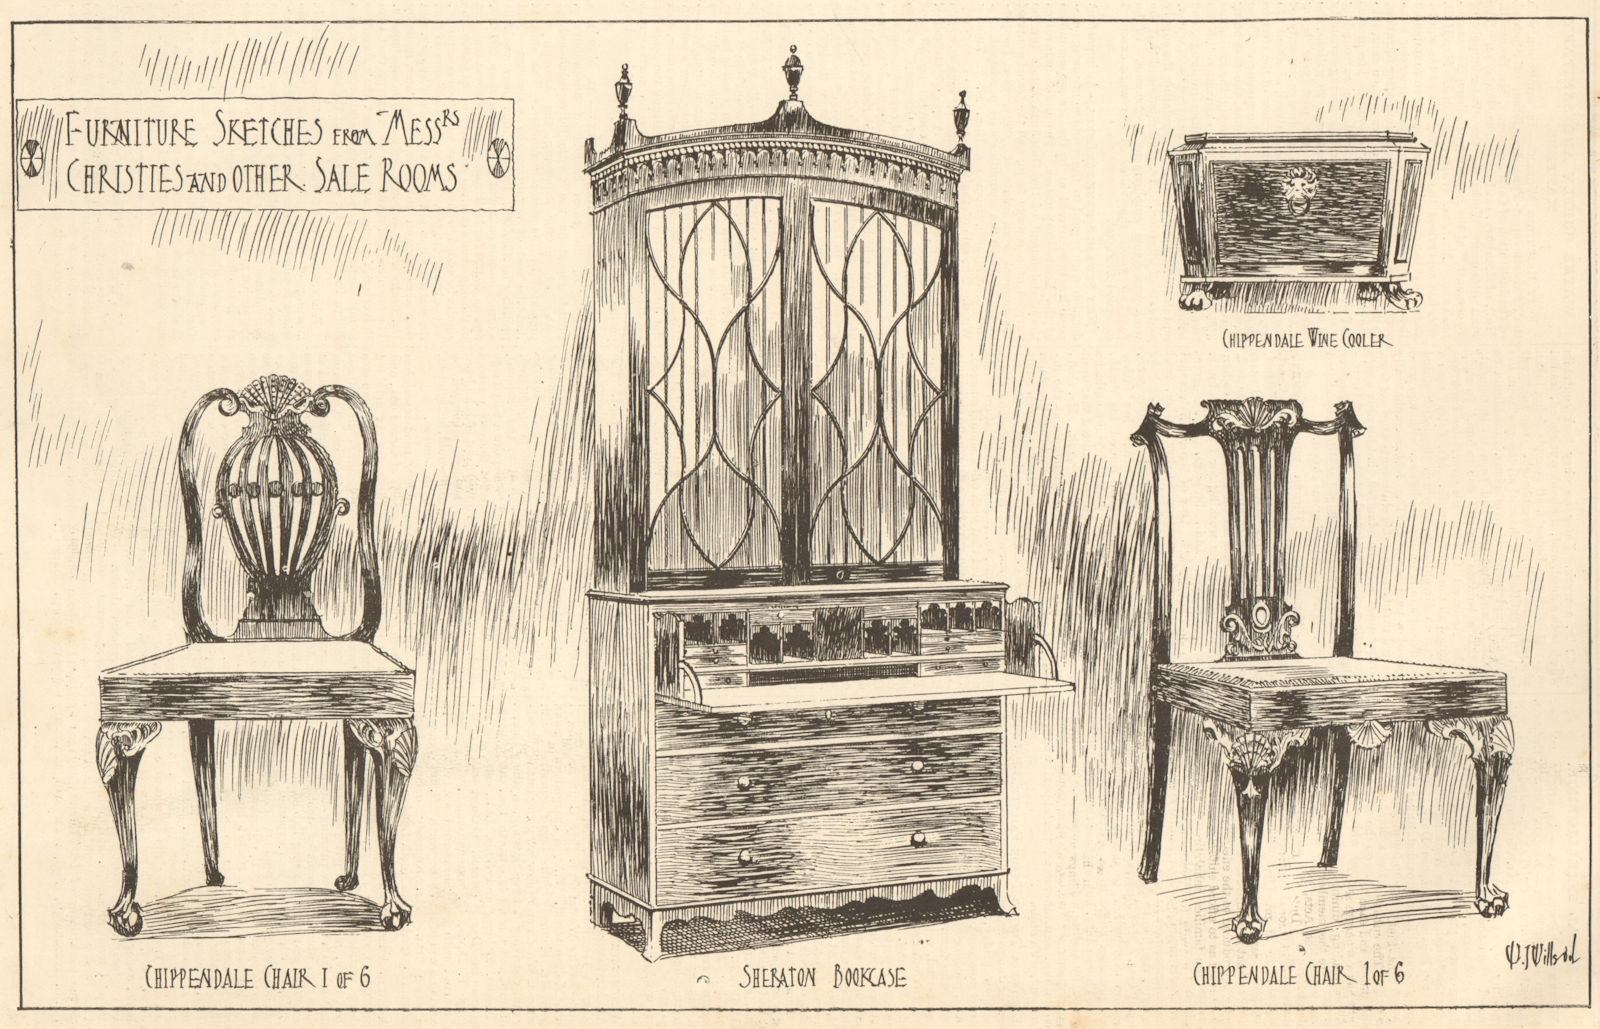 Christies furniture auction. Chippendale chair, Sheraton bookcase 1905 print